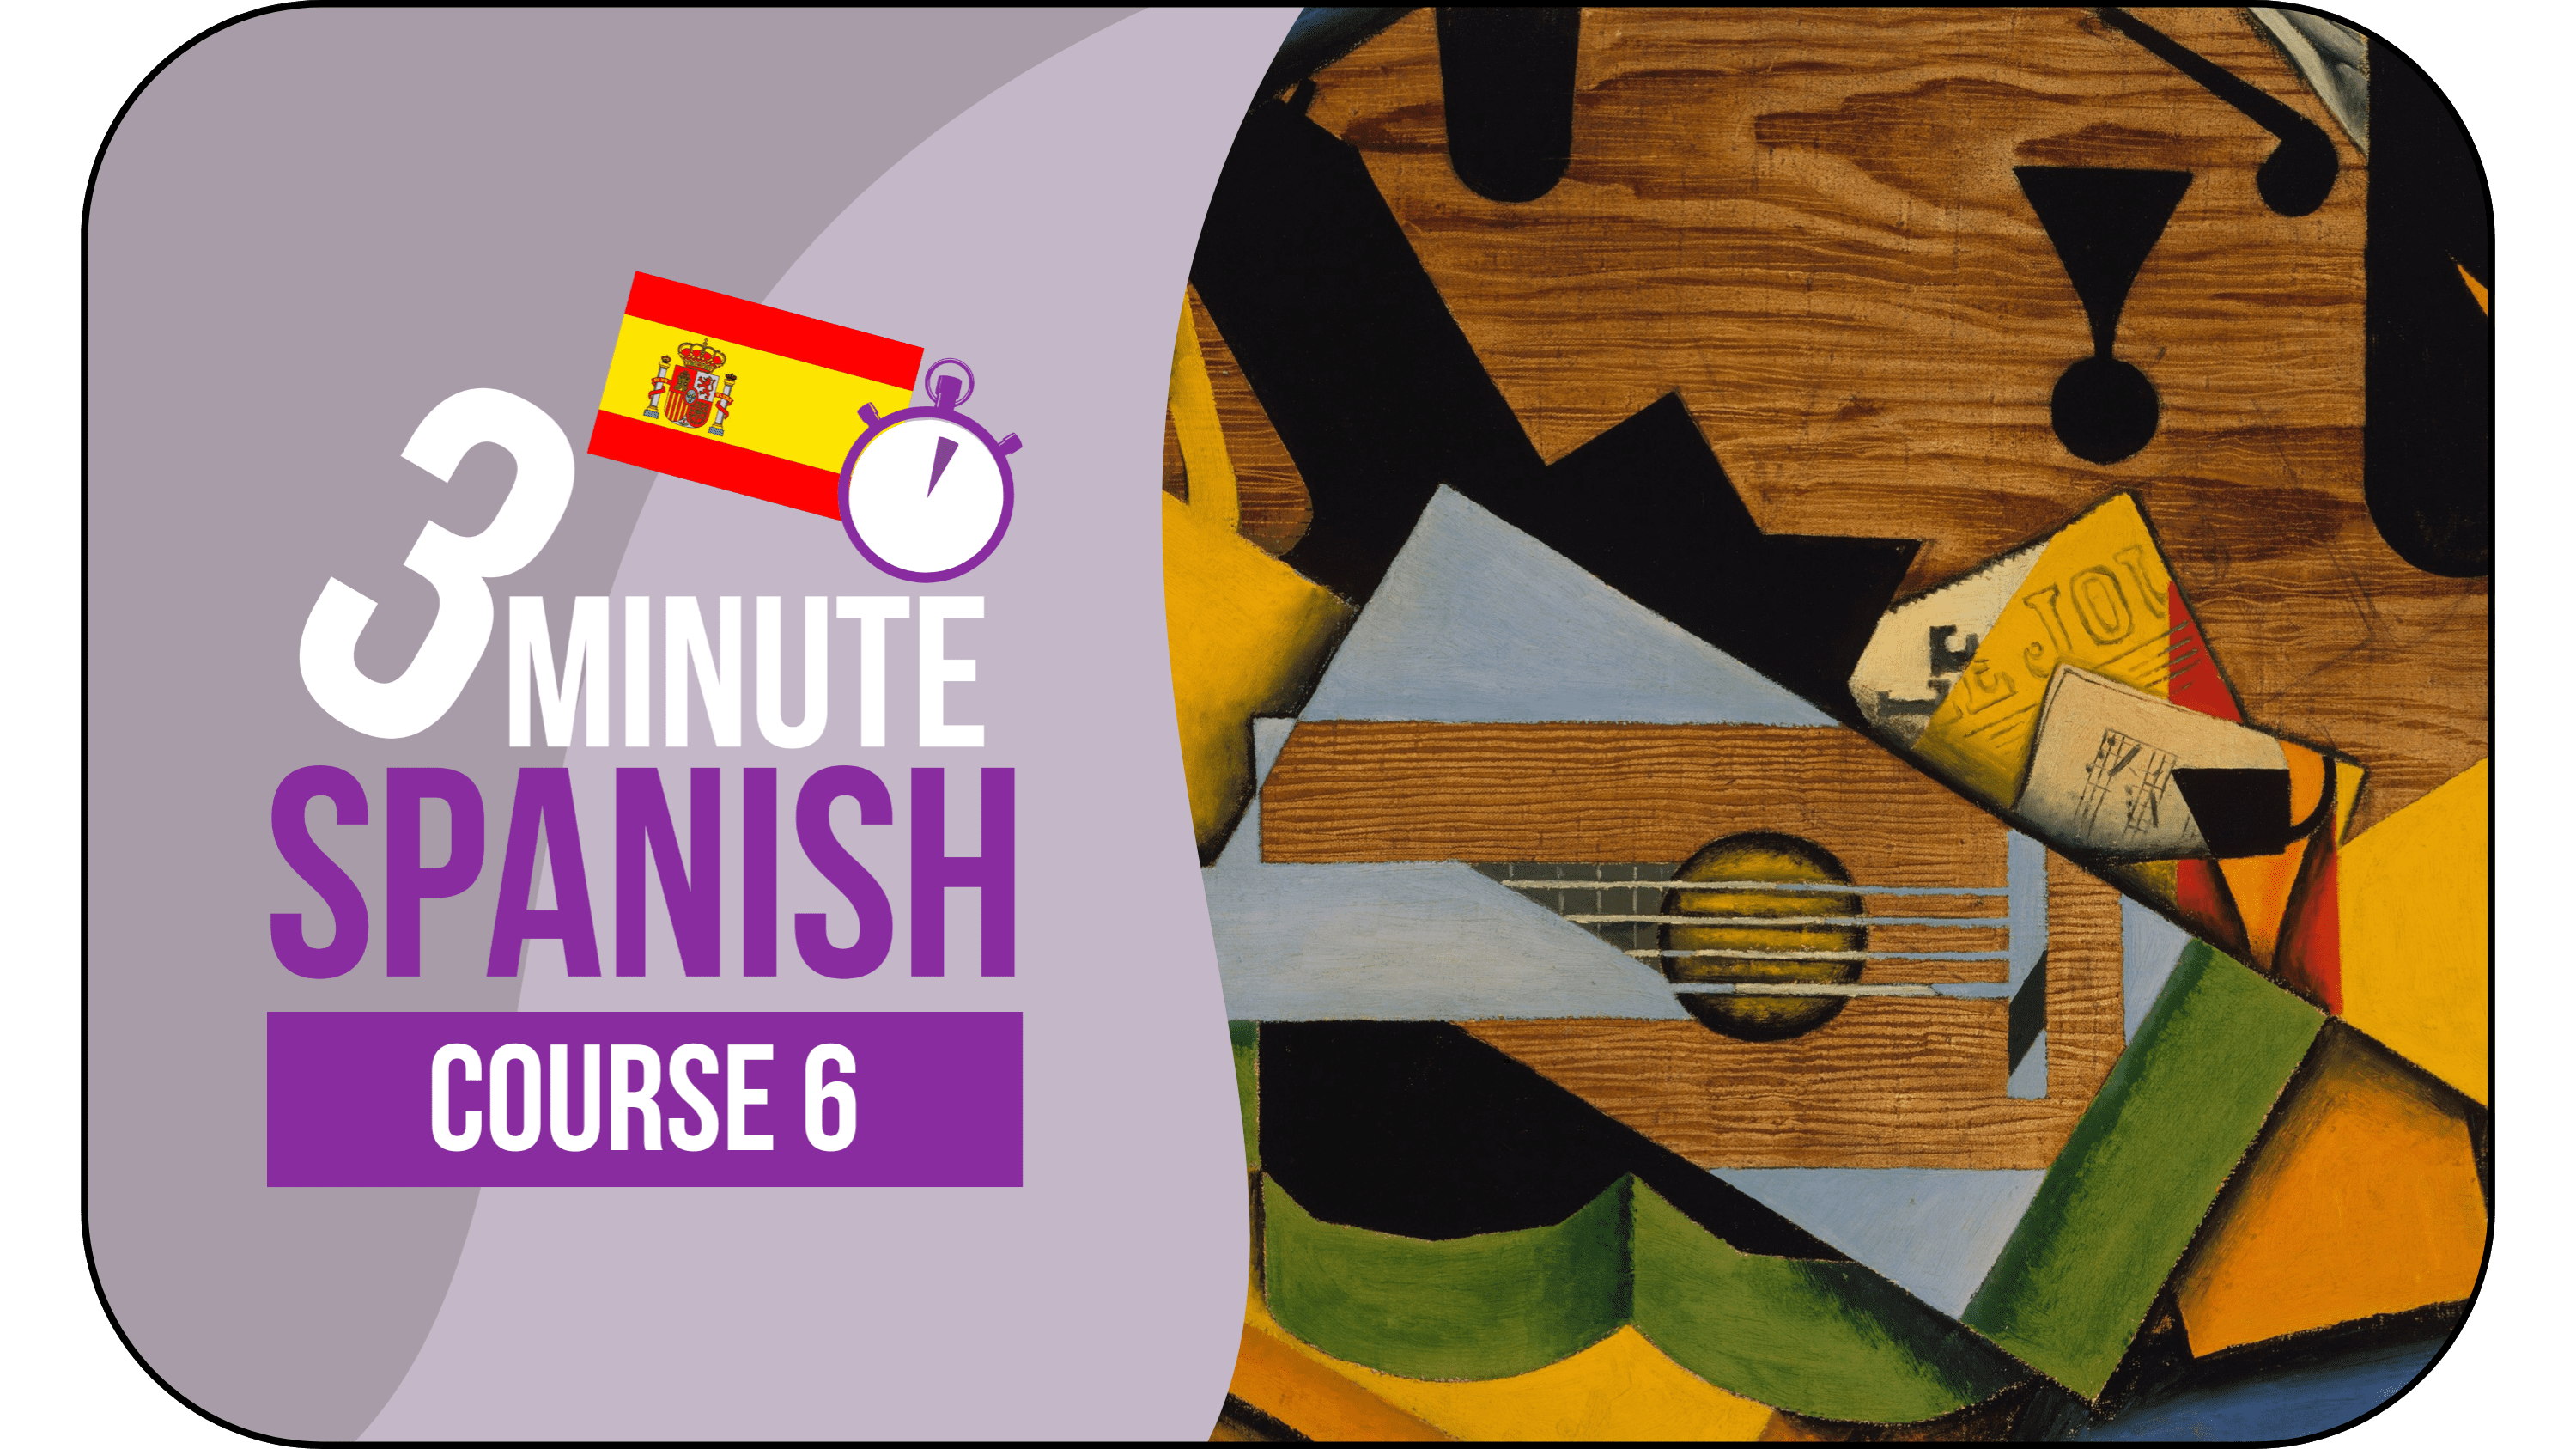 3 Minute Spanish - Course 6